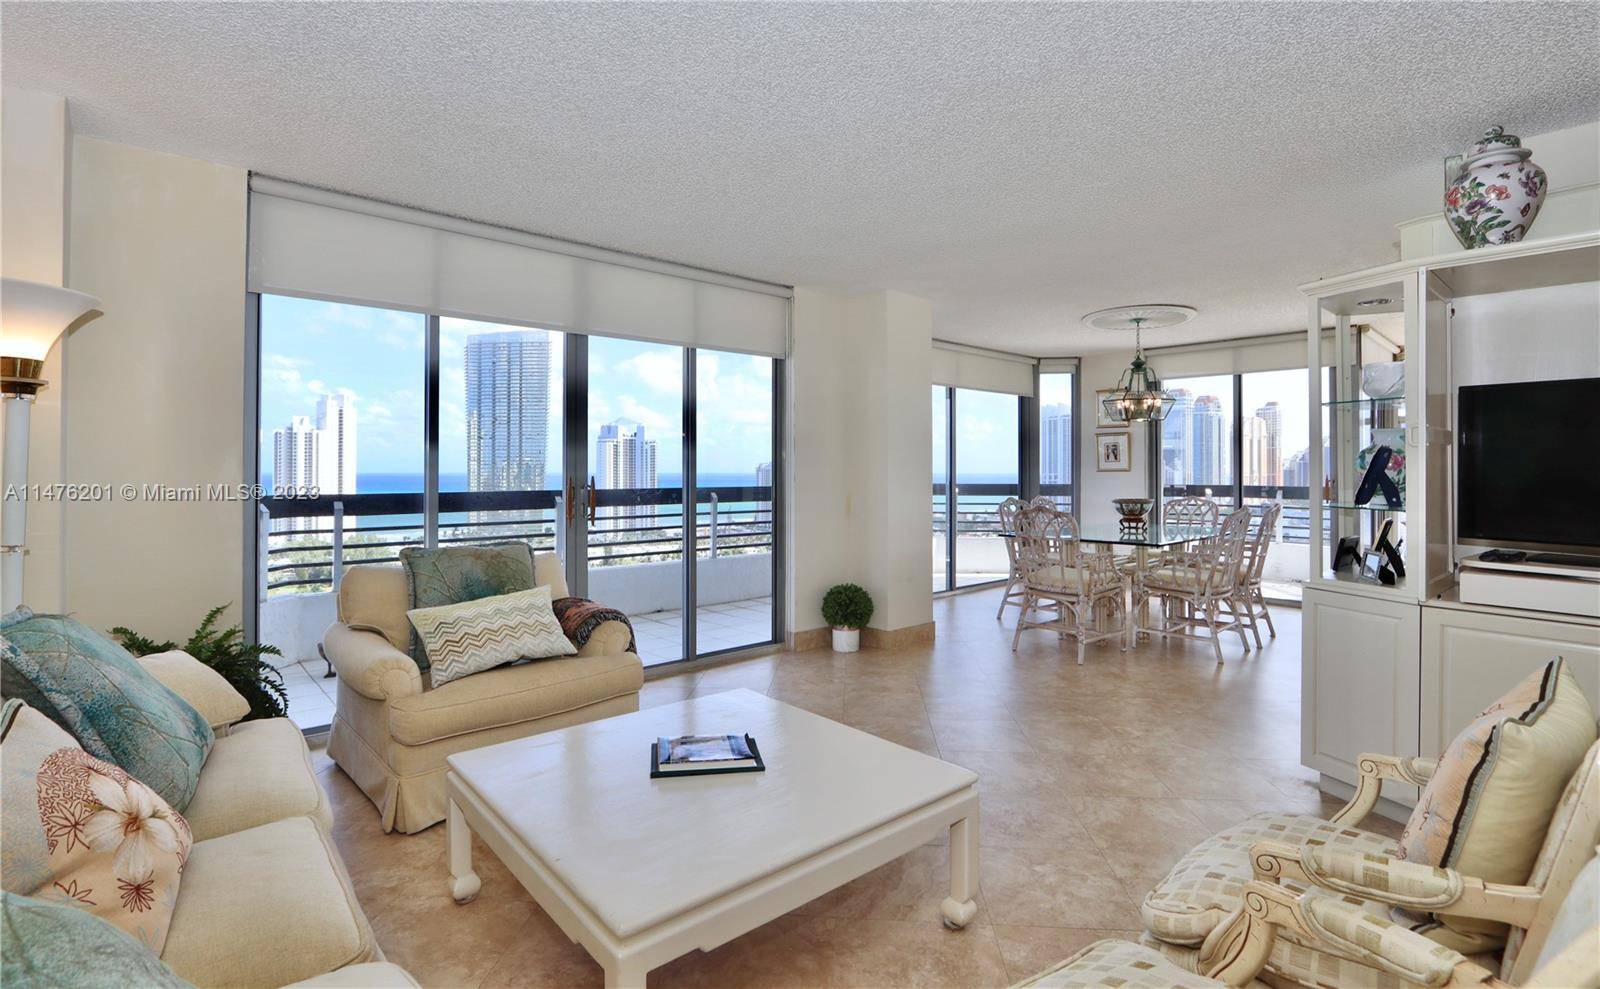 Exceptional corner unit offers breathtaking unobstructed views of the Ocean, the Intracoastal Sunny Isles.